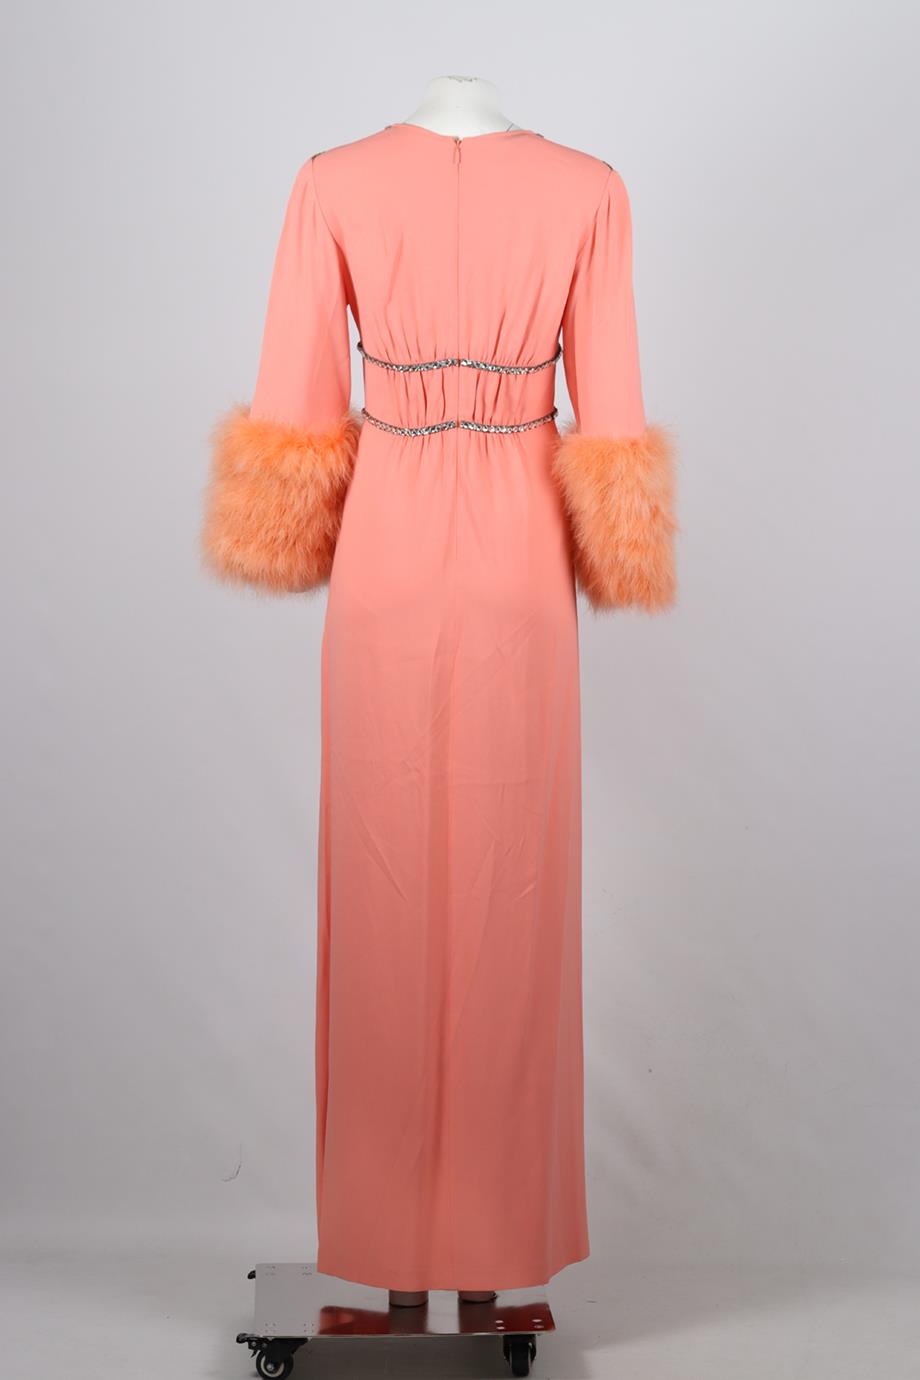 GUCCI FEATHER TRIMMED EMBELLISHED JERSEY GOWN SMALL-MEDIUM